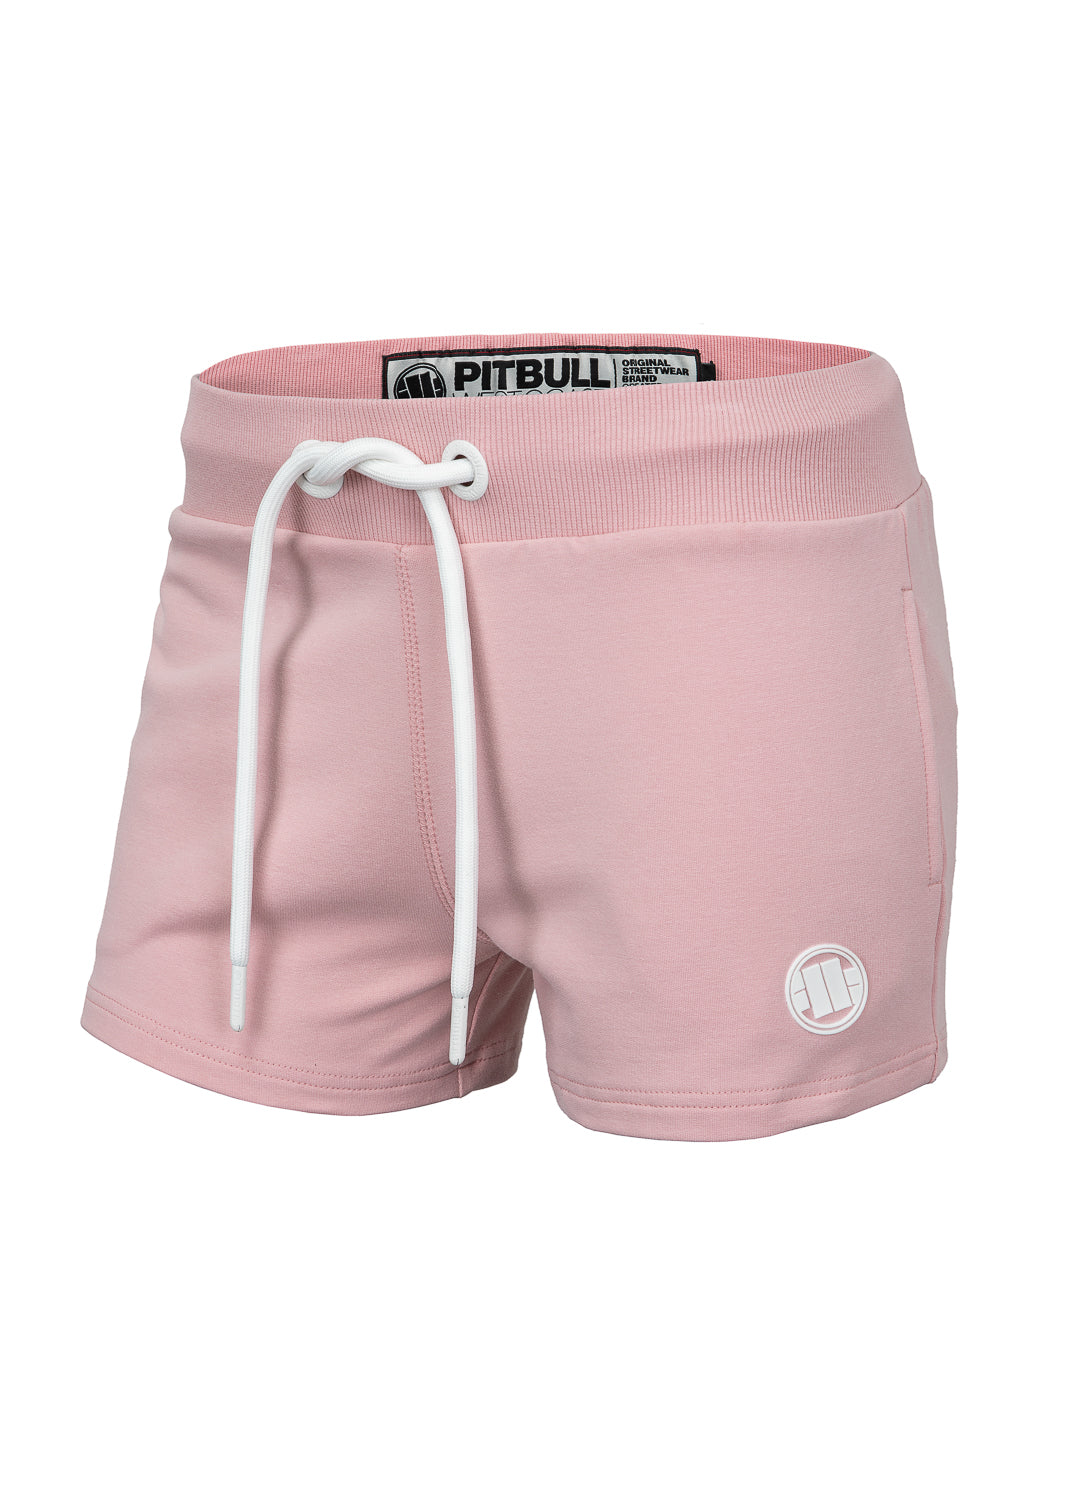 Women's shorts MARIPOSA French Terry Pink